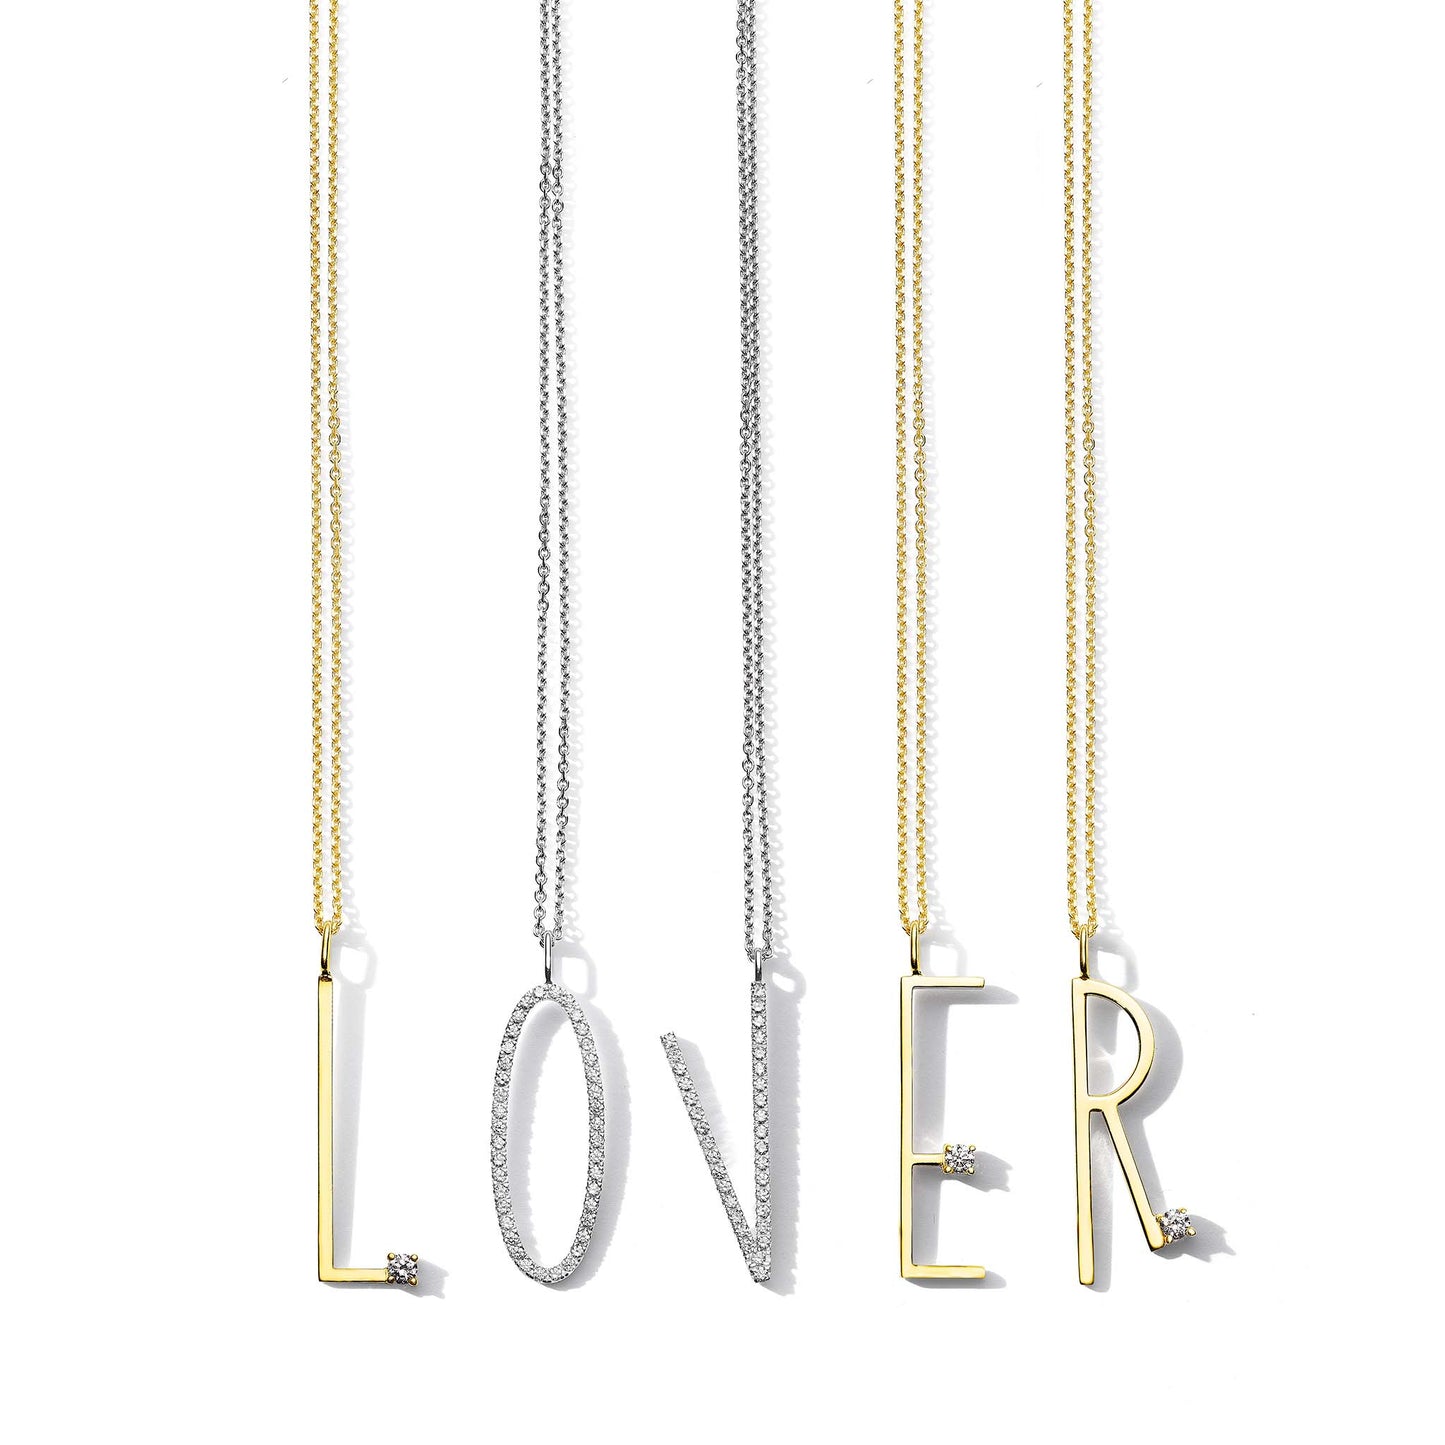 Mimi So Lover Type Letter Necklaces Group